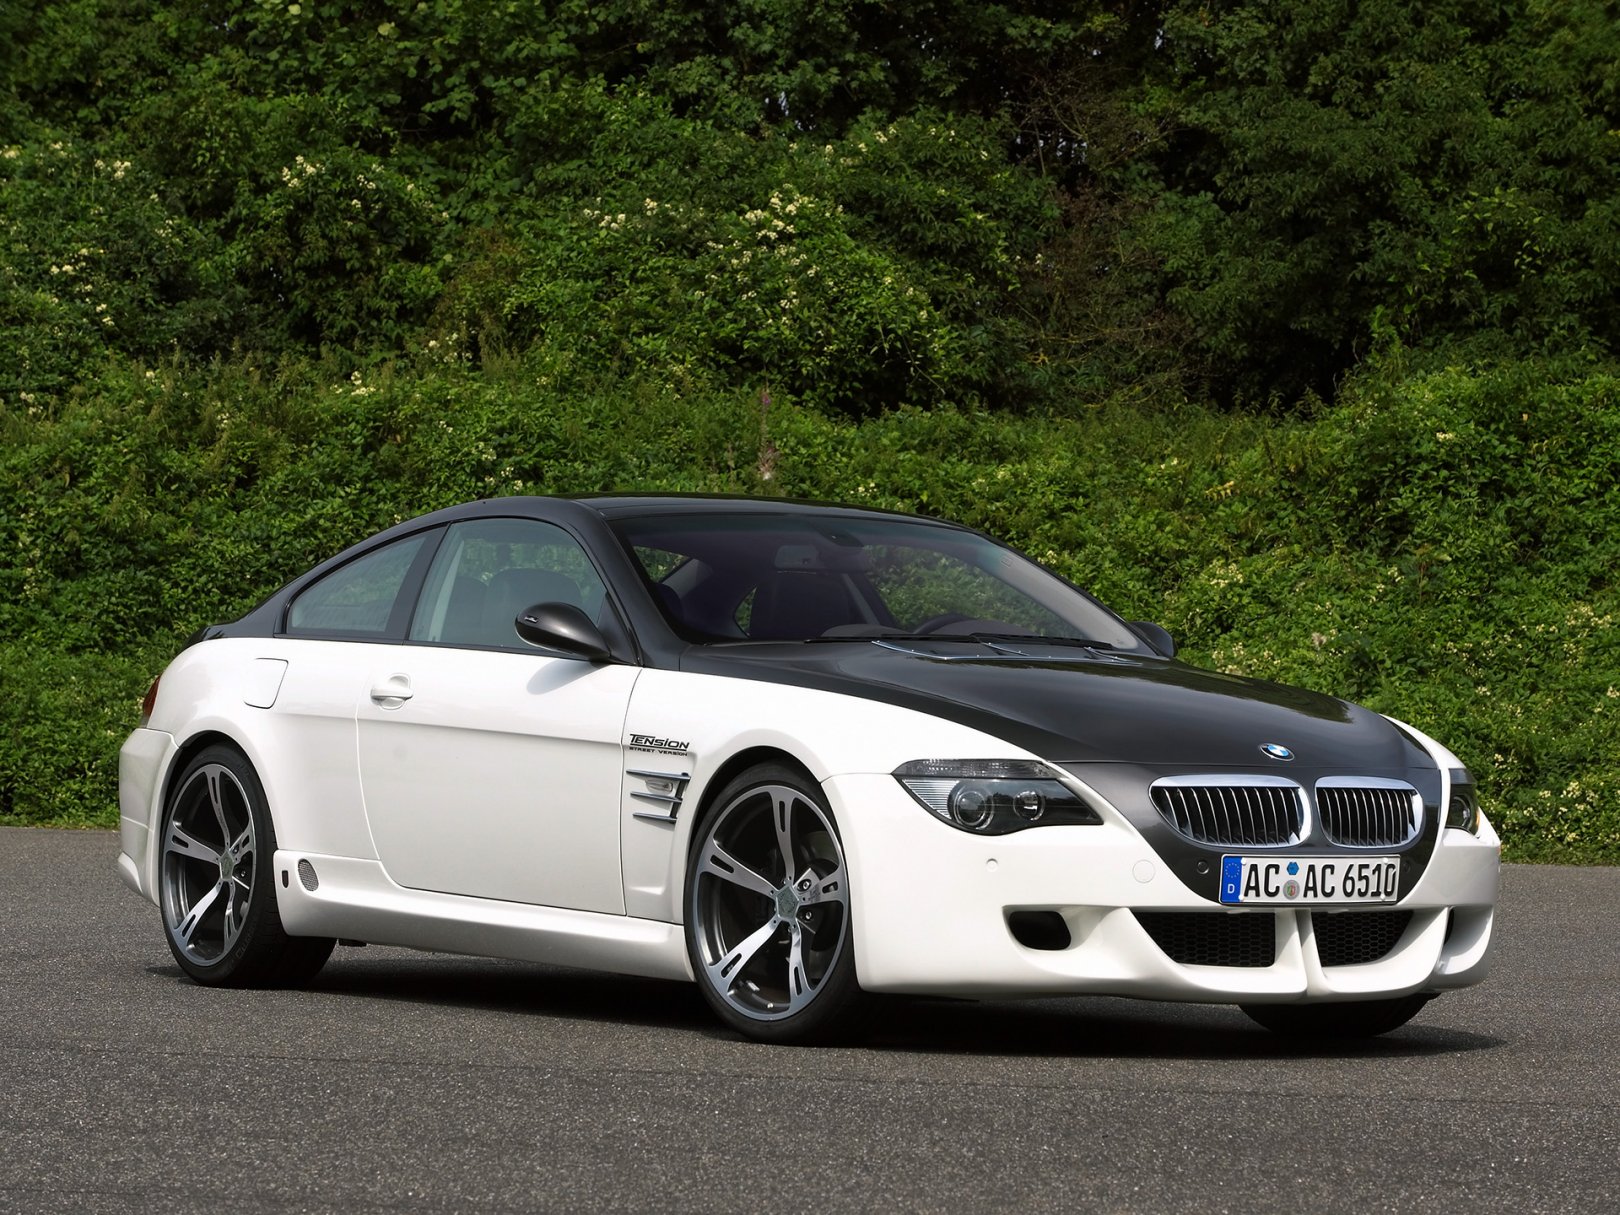 Foto: AC Schnitzer TENSION BMW 6  Series Front And Side Closeup (2007)